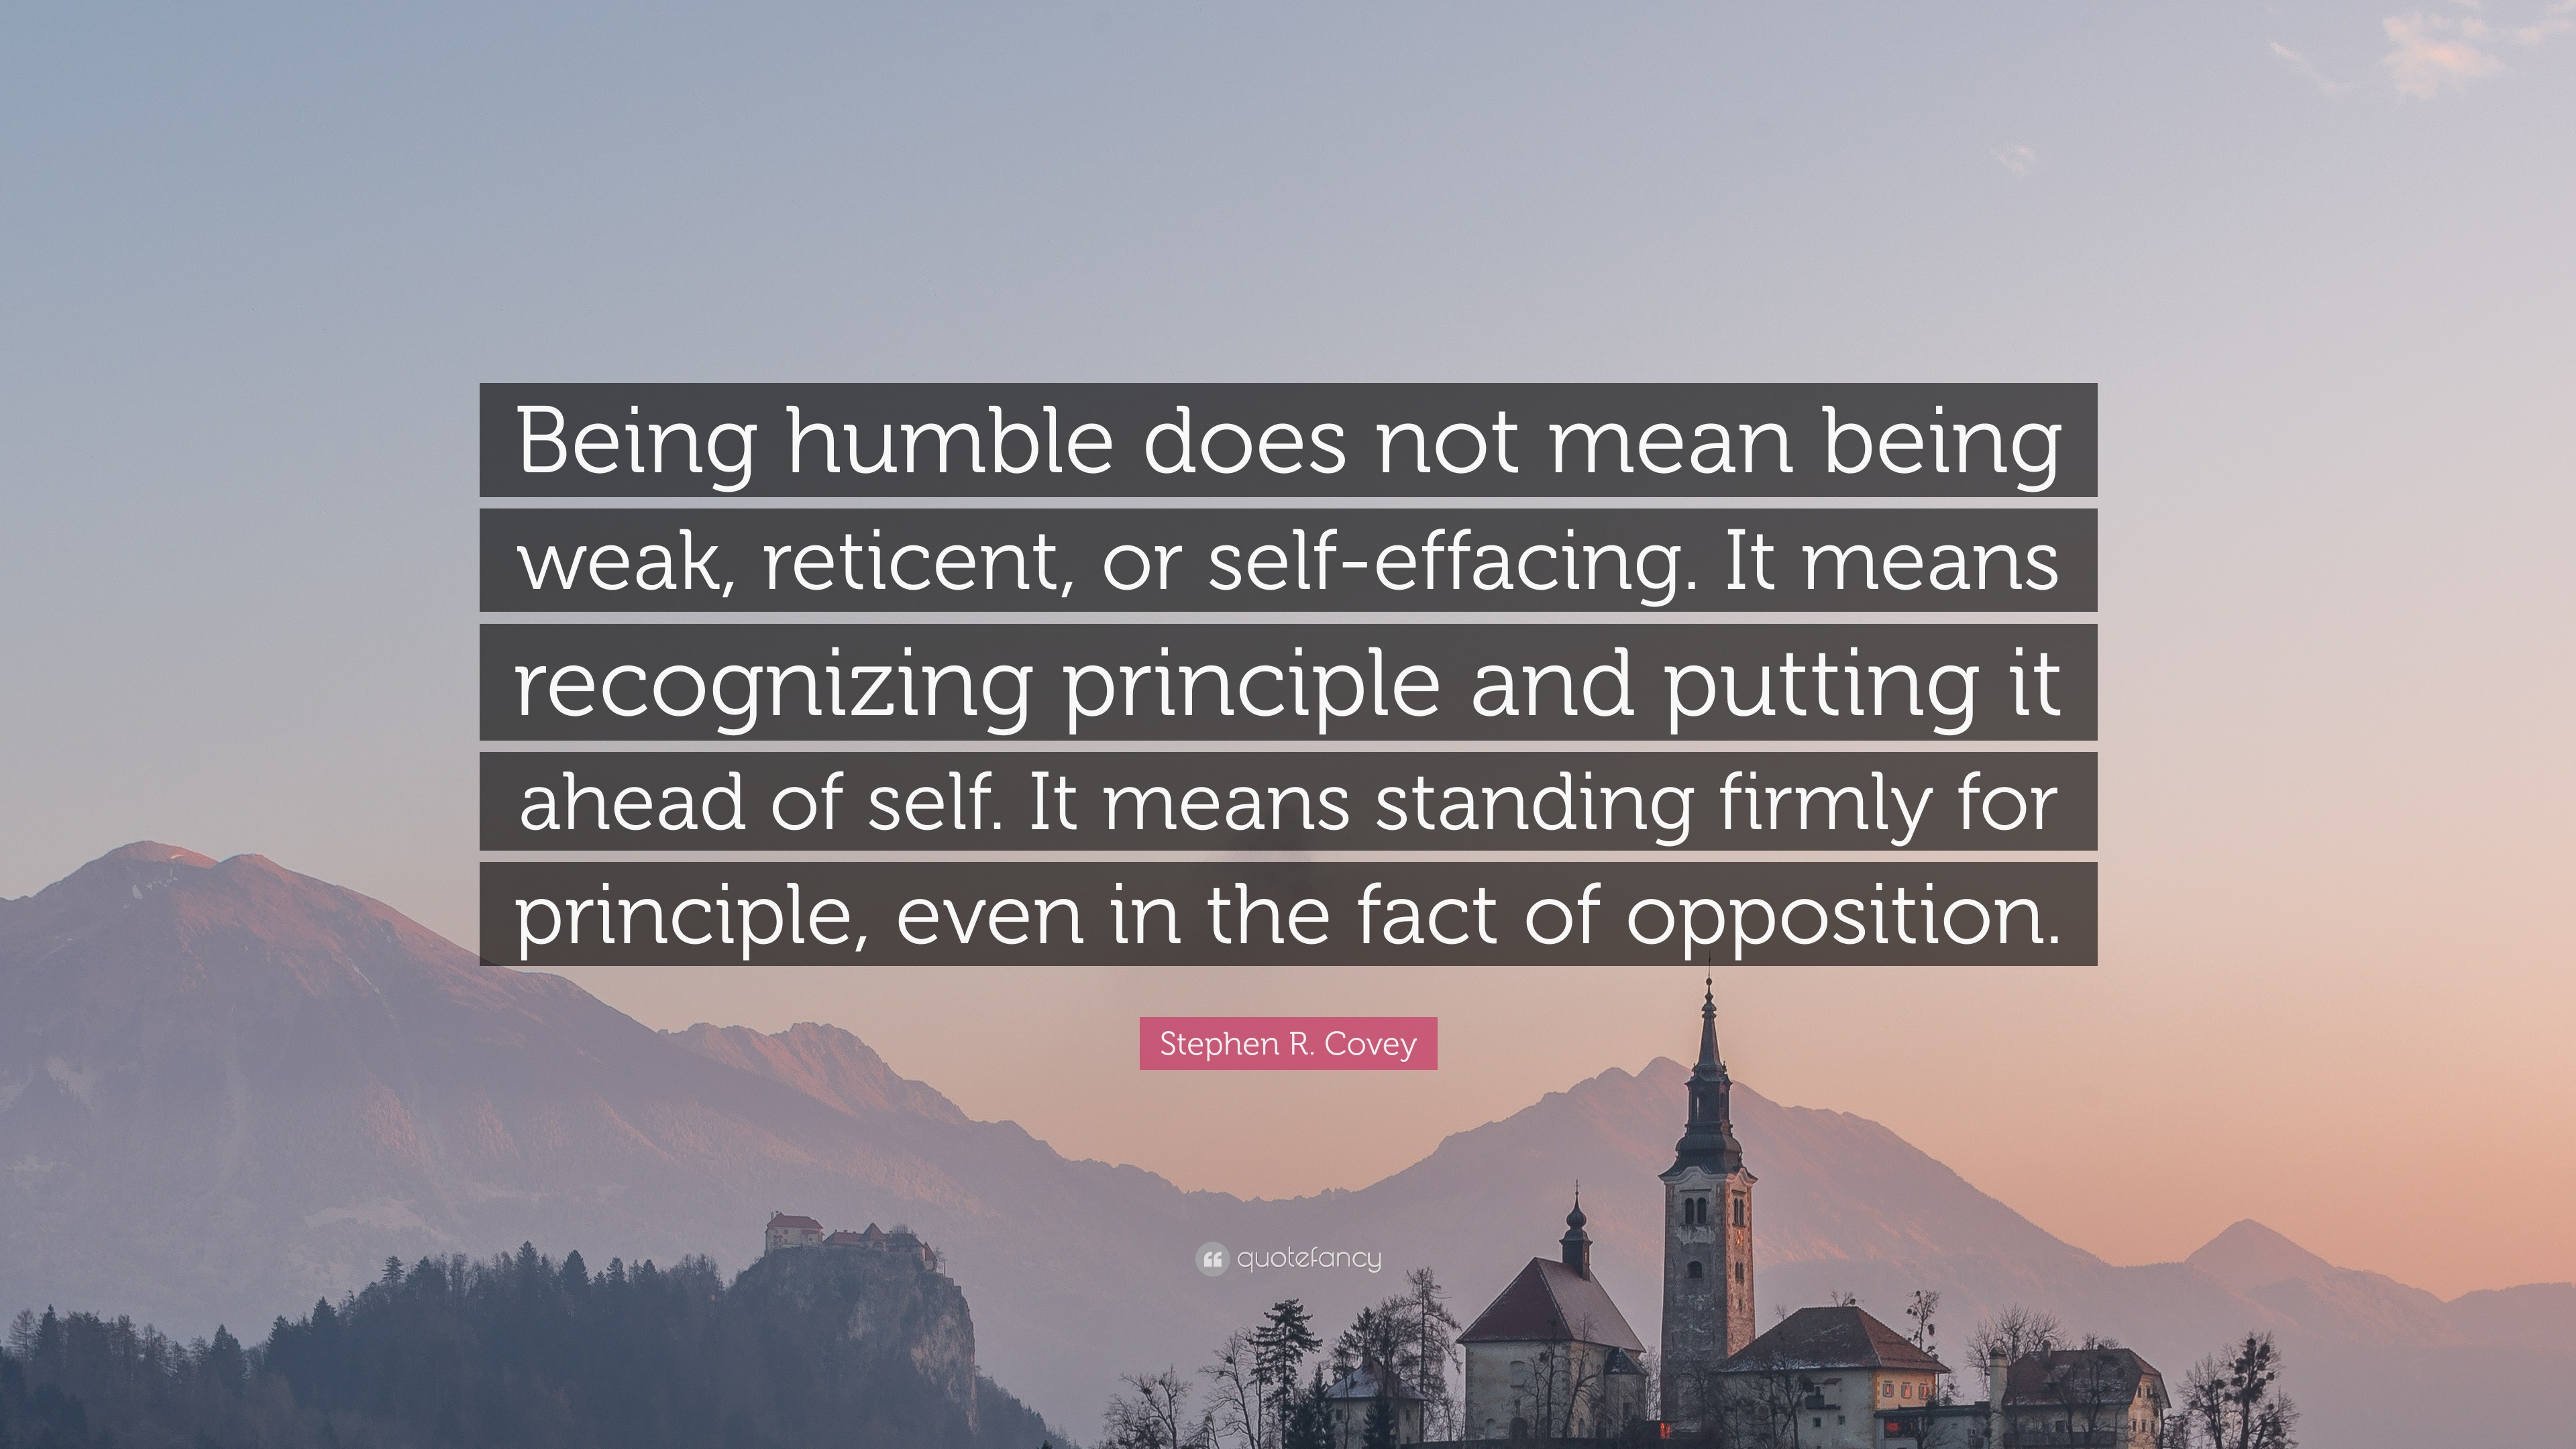 Stephen R. Covey Quote: “Being humble does not mean being weak ...